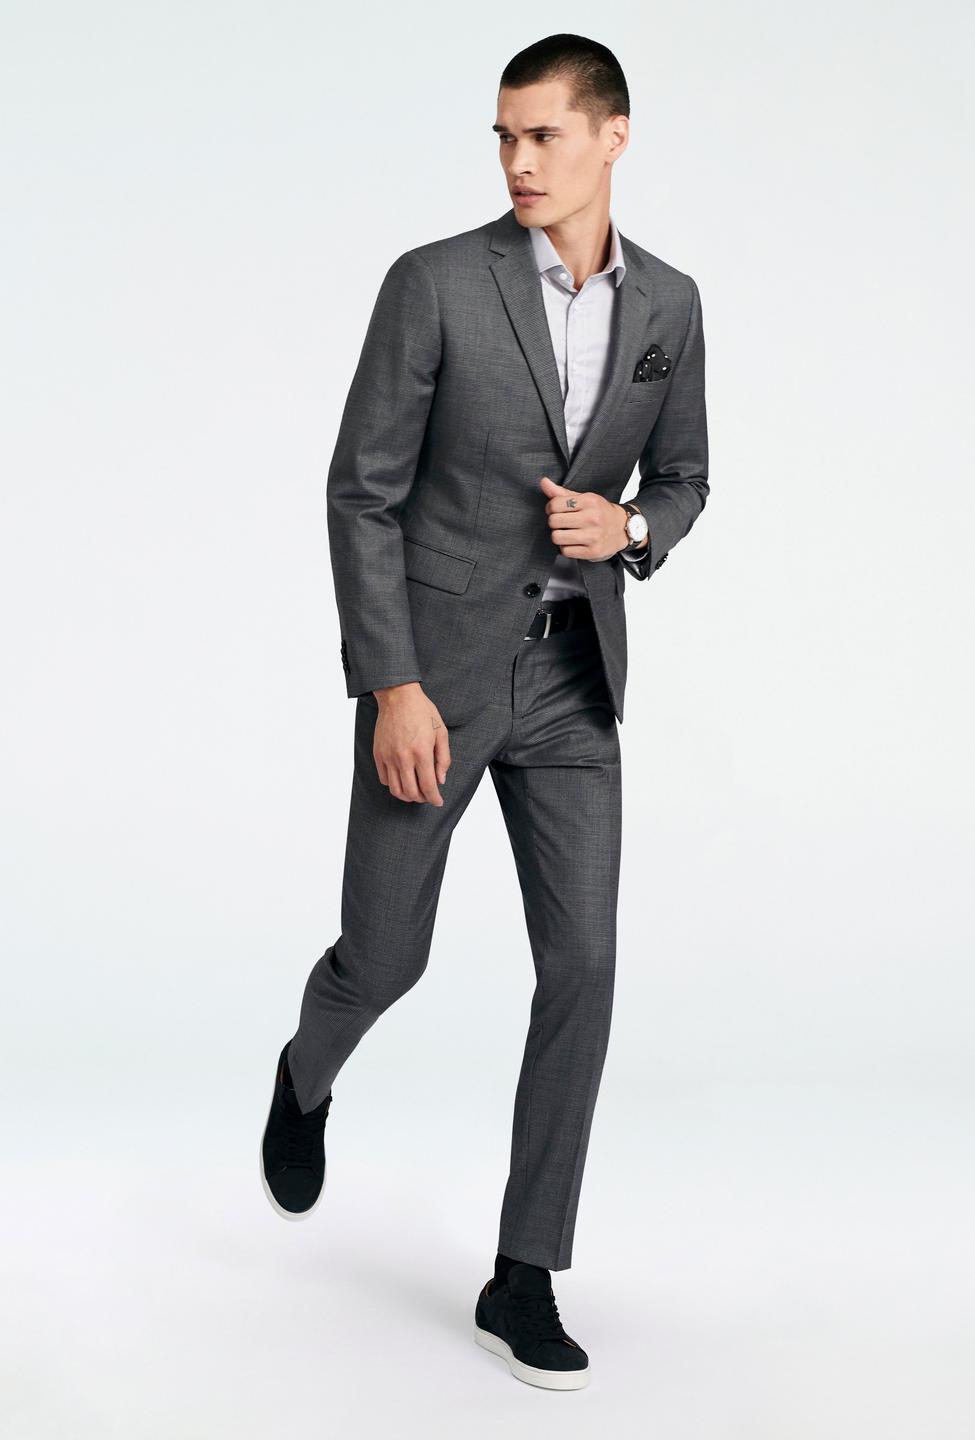 Gray suit - Malvern Houndstooth Design from Seasonal Indochino Collection